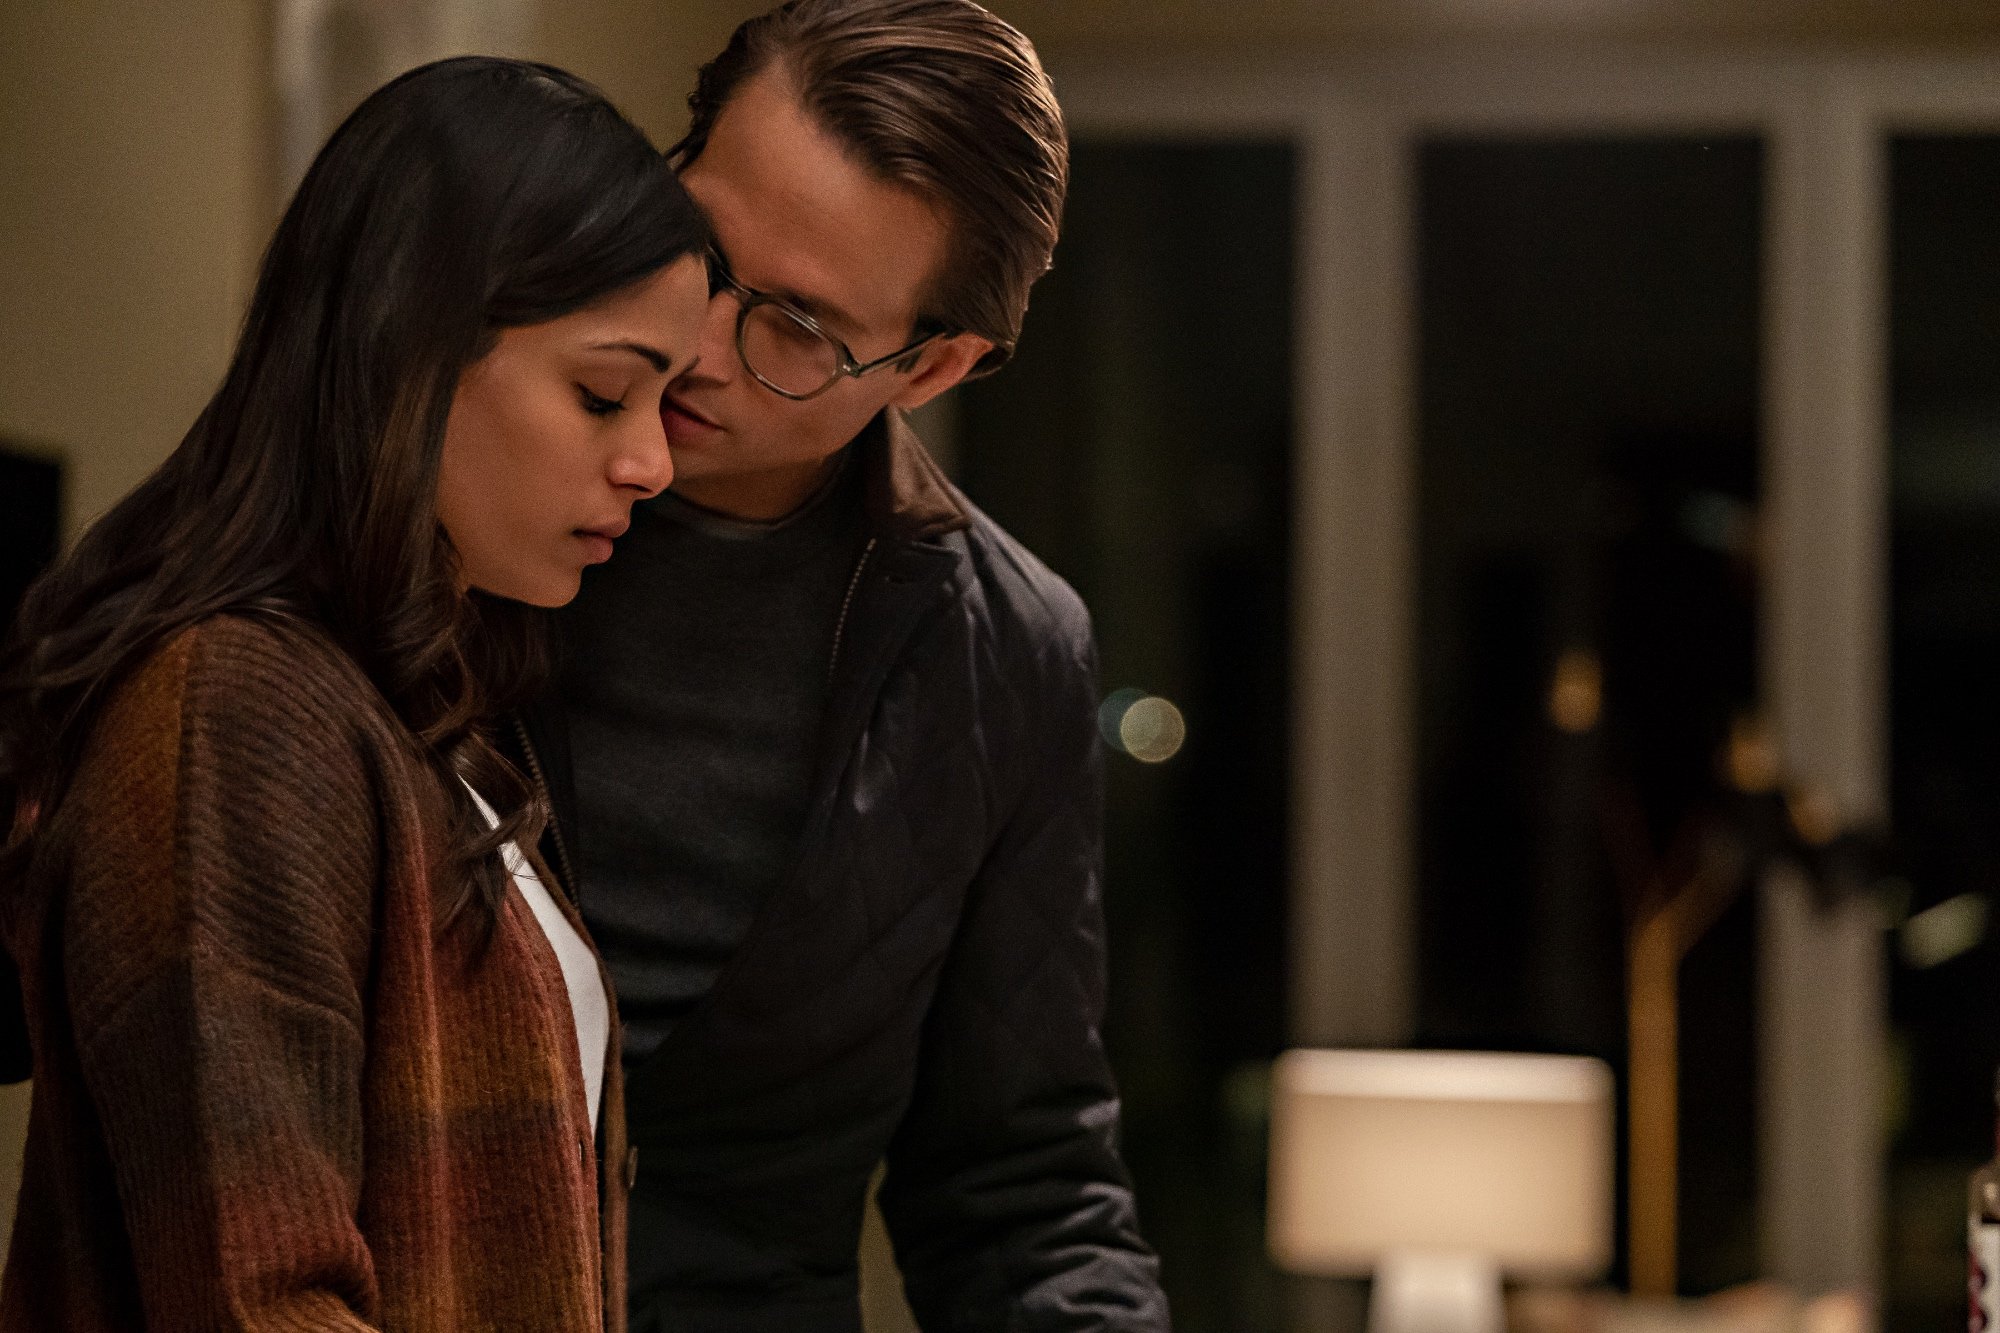 'Intrusion' stars Freida Pinto as Meera and Logan Marshall-Green as Henry standing in their new home